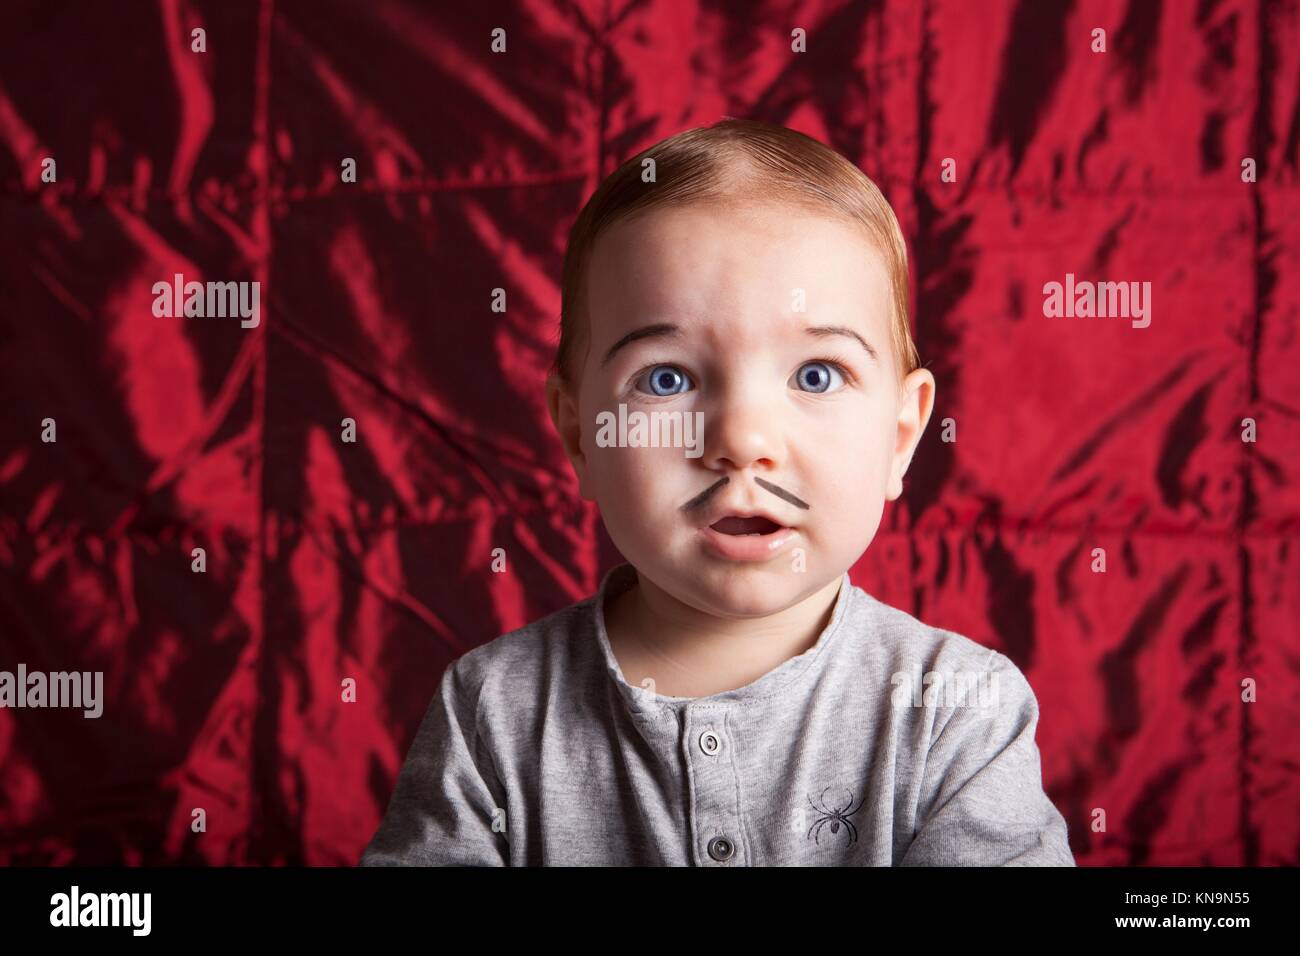 Portrait of a little boy dress up for halloween party. Red satin background. Stock Photo